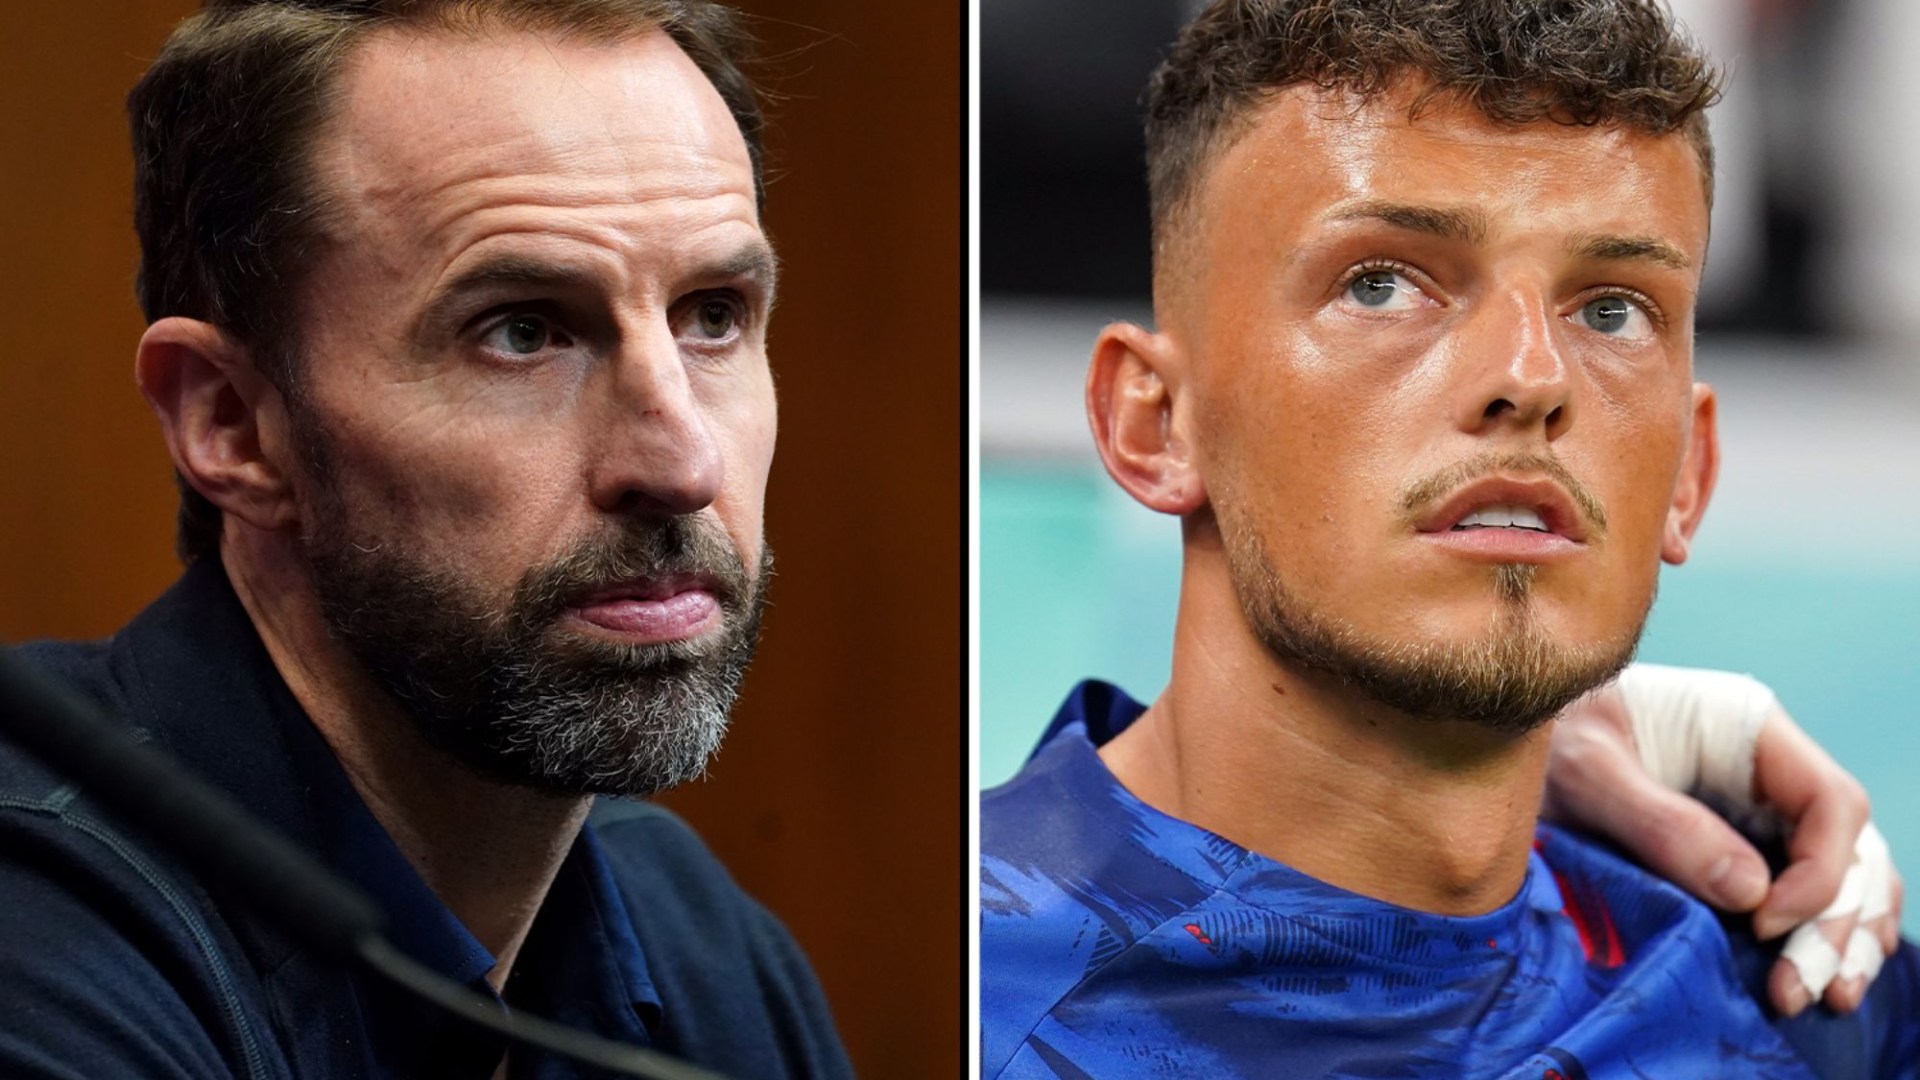 Gareth Southgate reveals he doesn’t know full reason Ben White won’t play for England but warns against ‘backlash’ [Video]